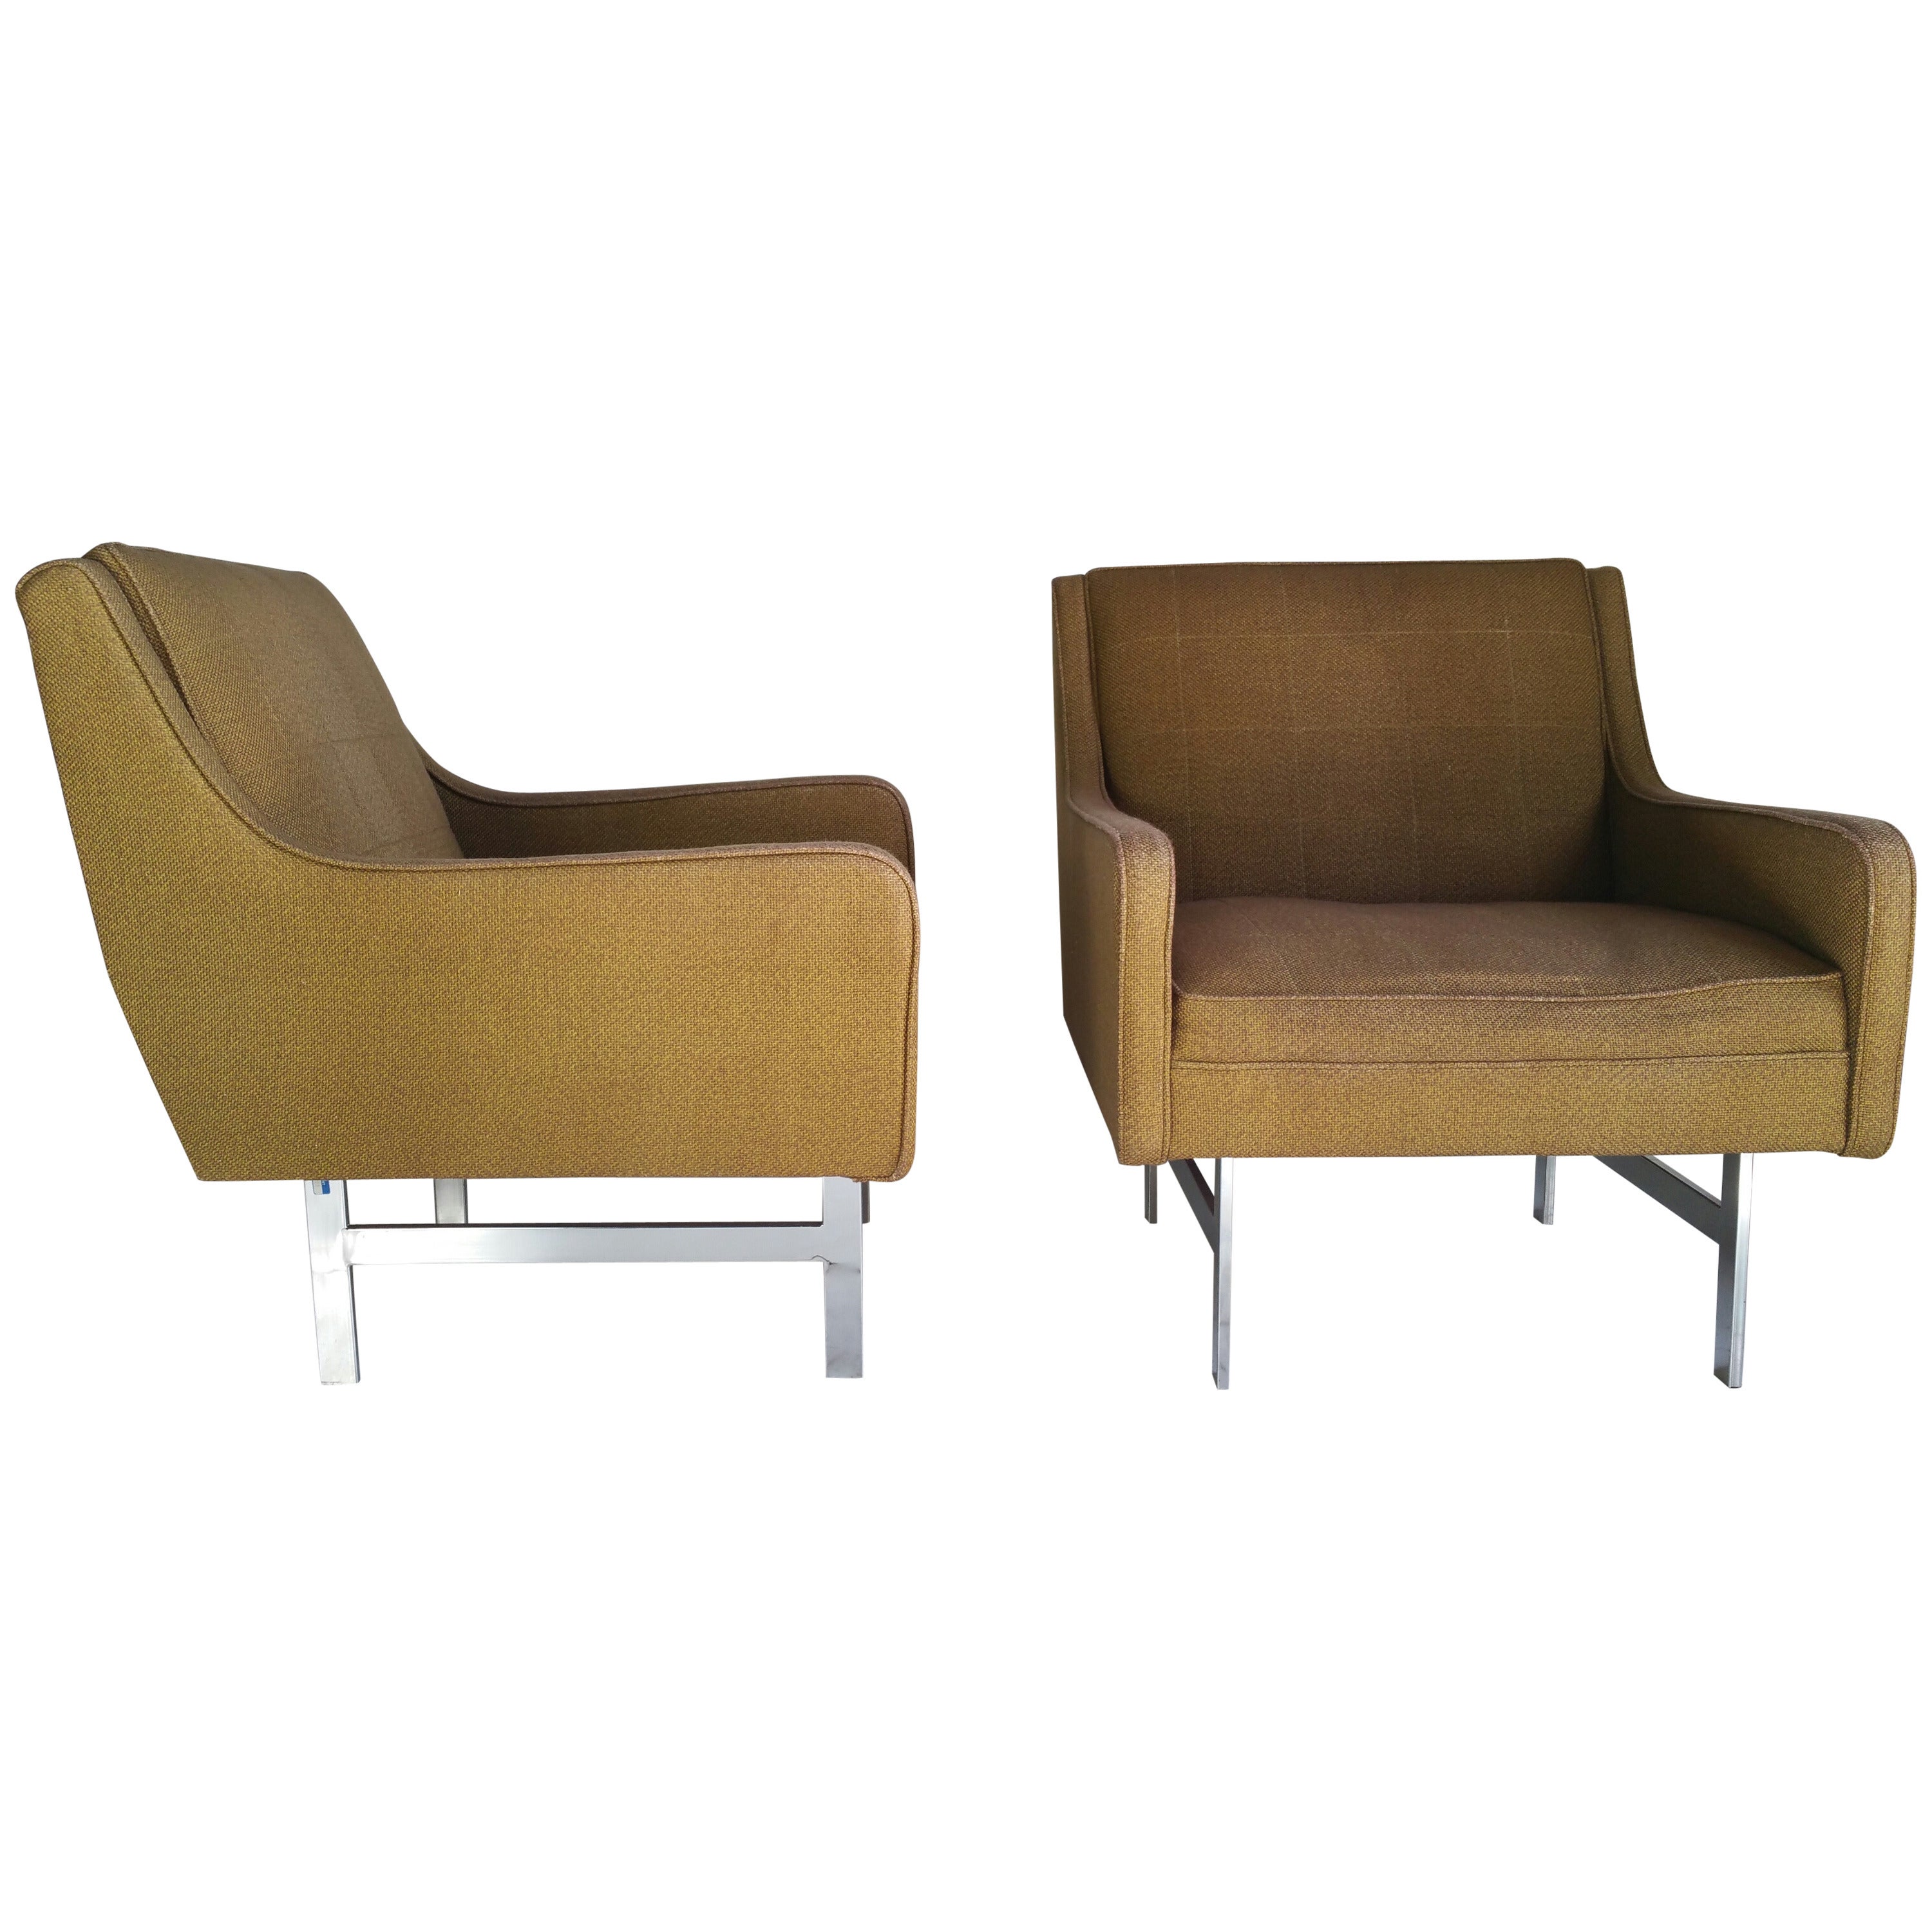 Pair of Modernist Lounge Chairs For Sale